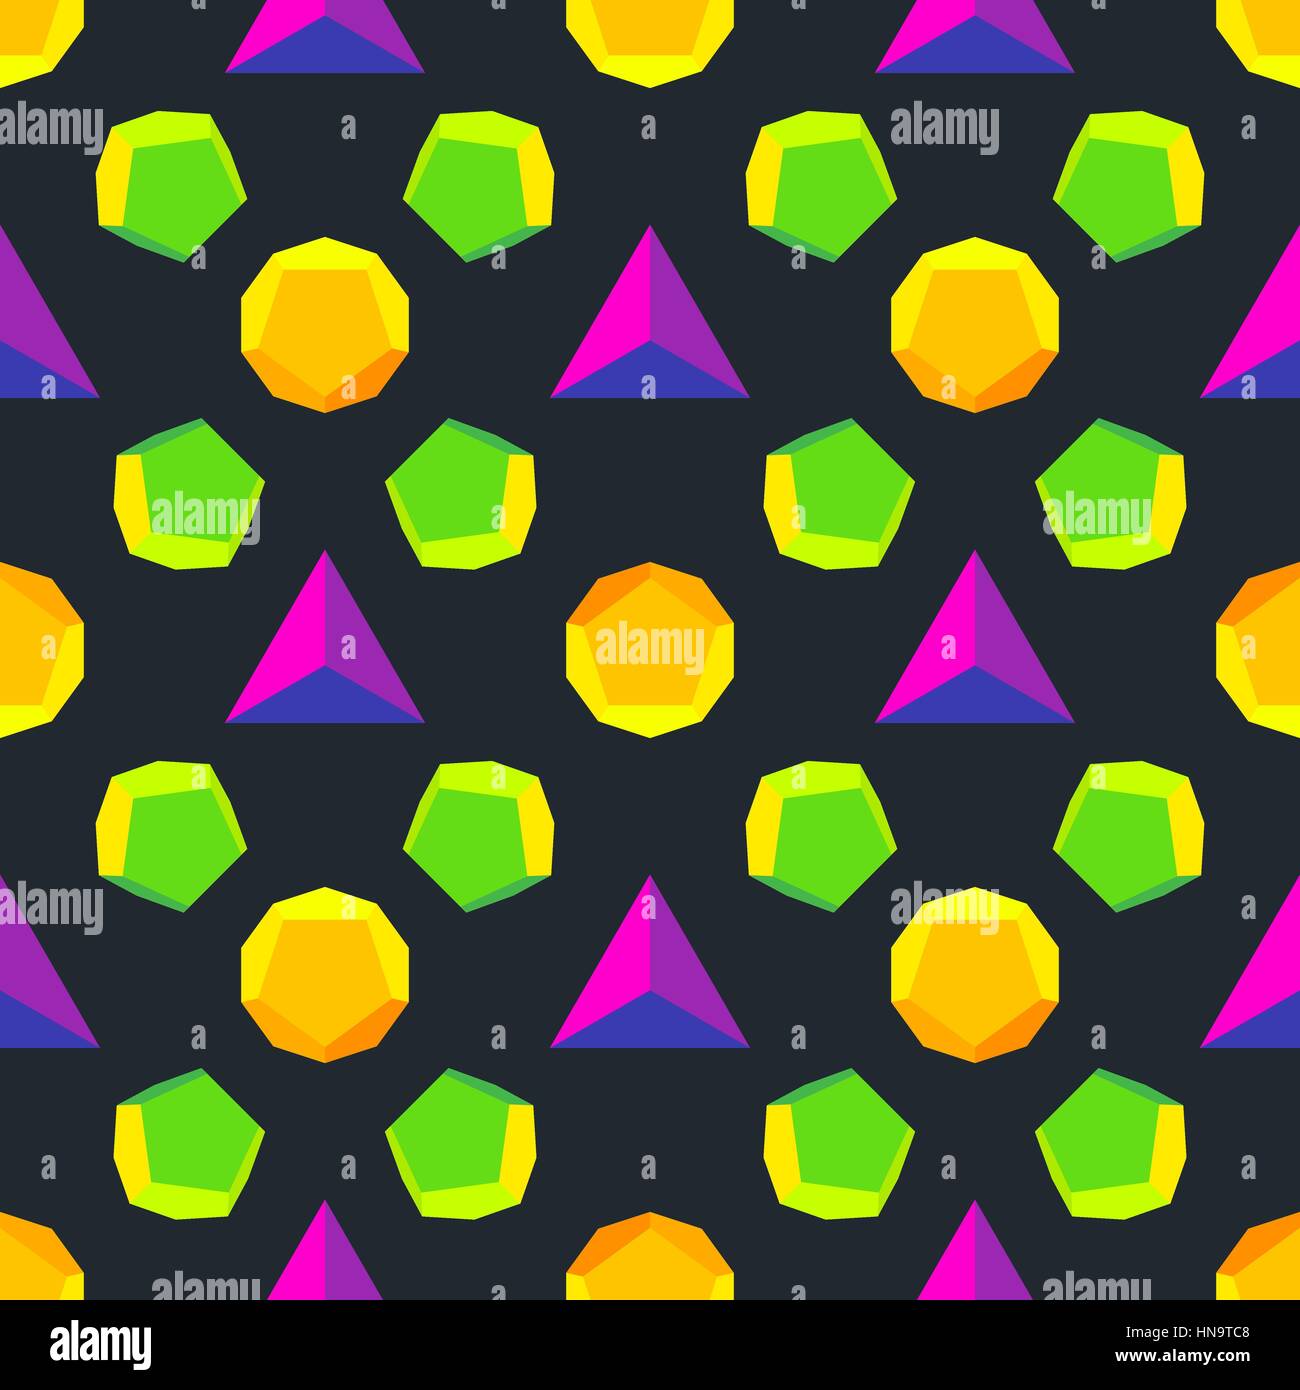 vector various platonic solids violet green orange yellow colors seamless pattern isolated black background Stock Vector